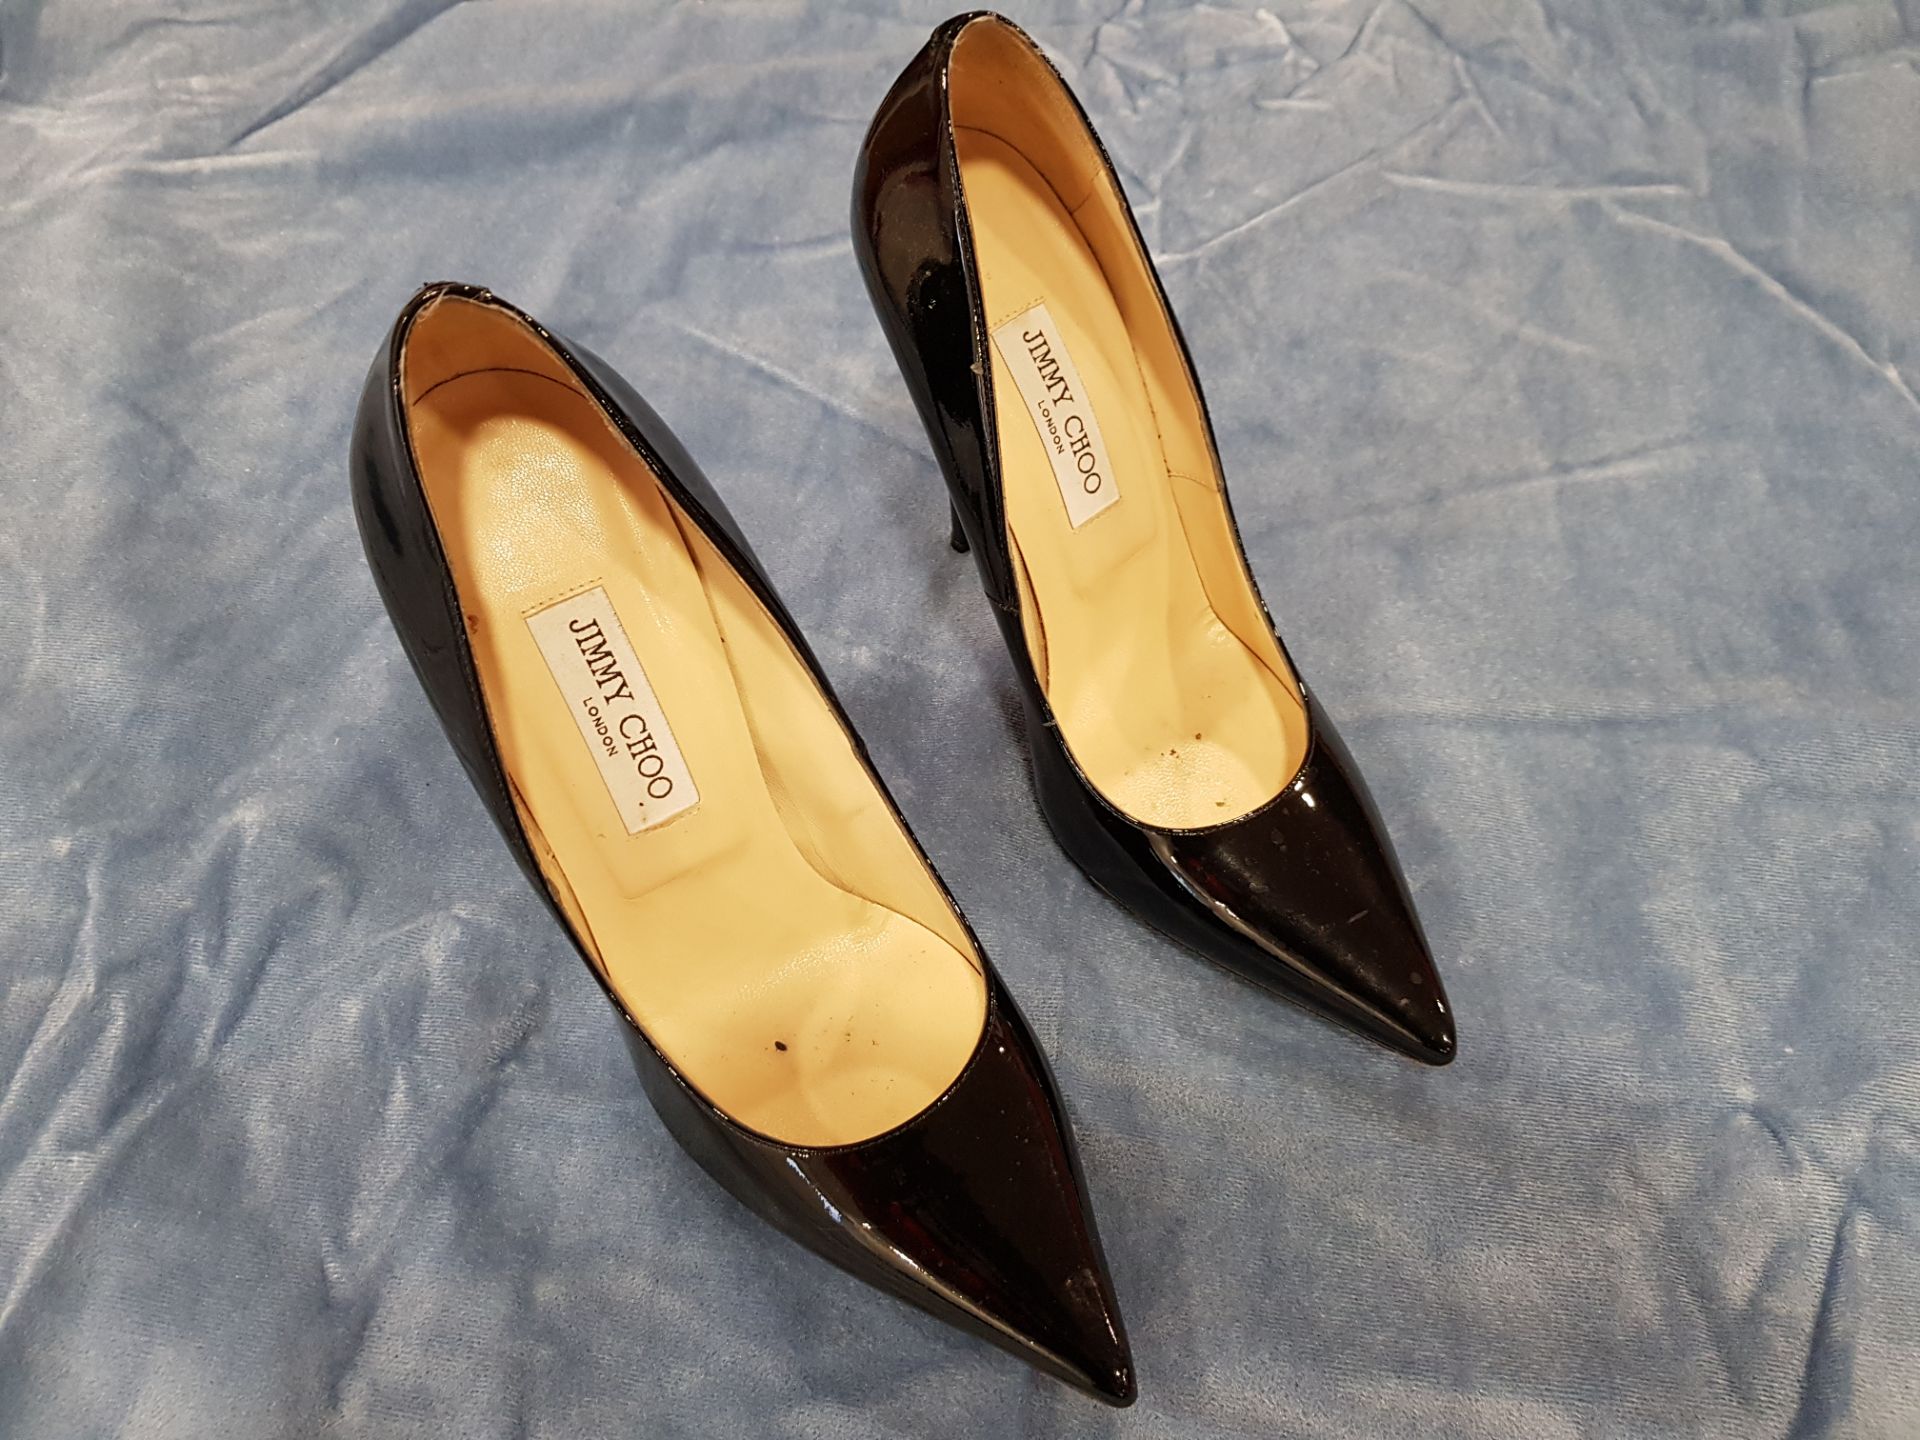 1 X PAIR JIMMY CHOO BLACK HIGH HEELED STILETTO SHOES SIZE 40 - PLEASE NOTE ITEMS PRE OWNED NOT NEW